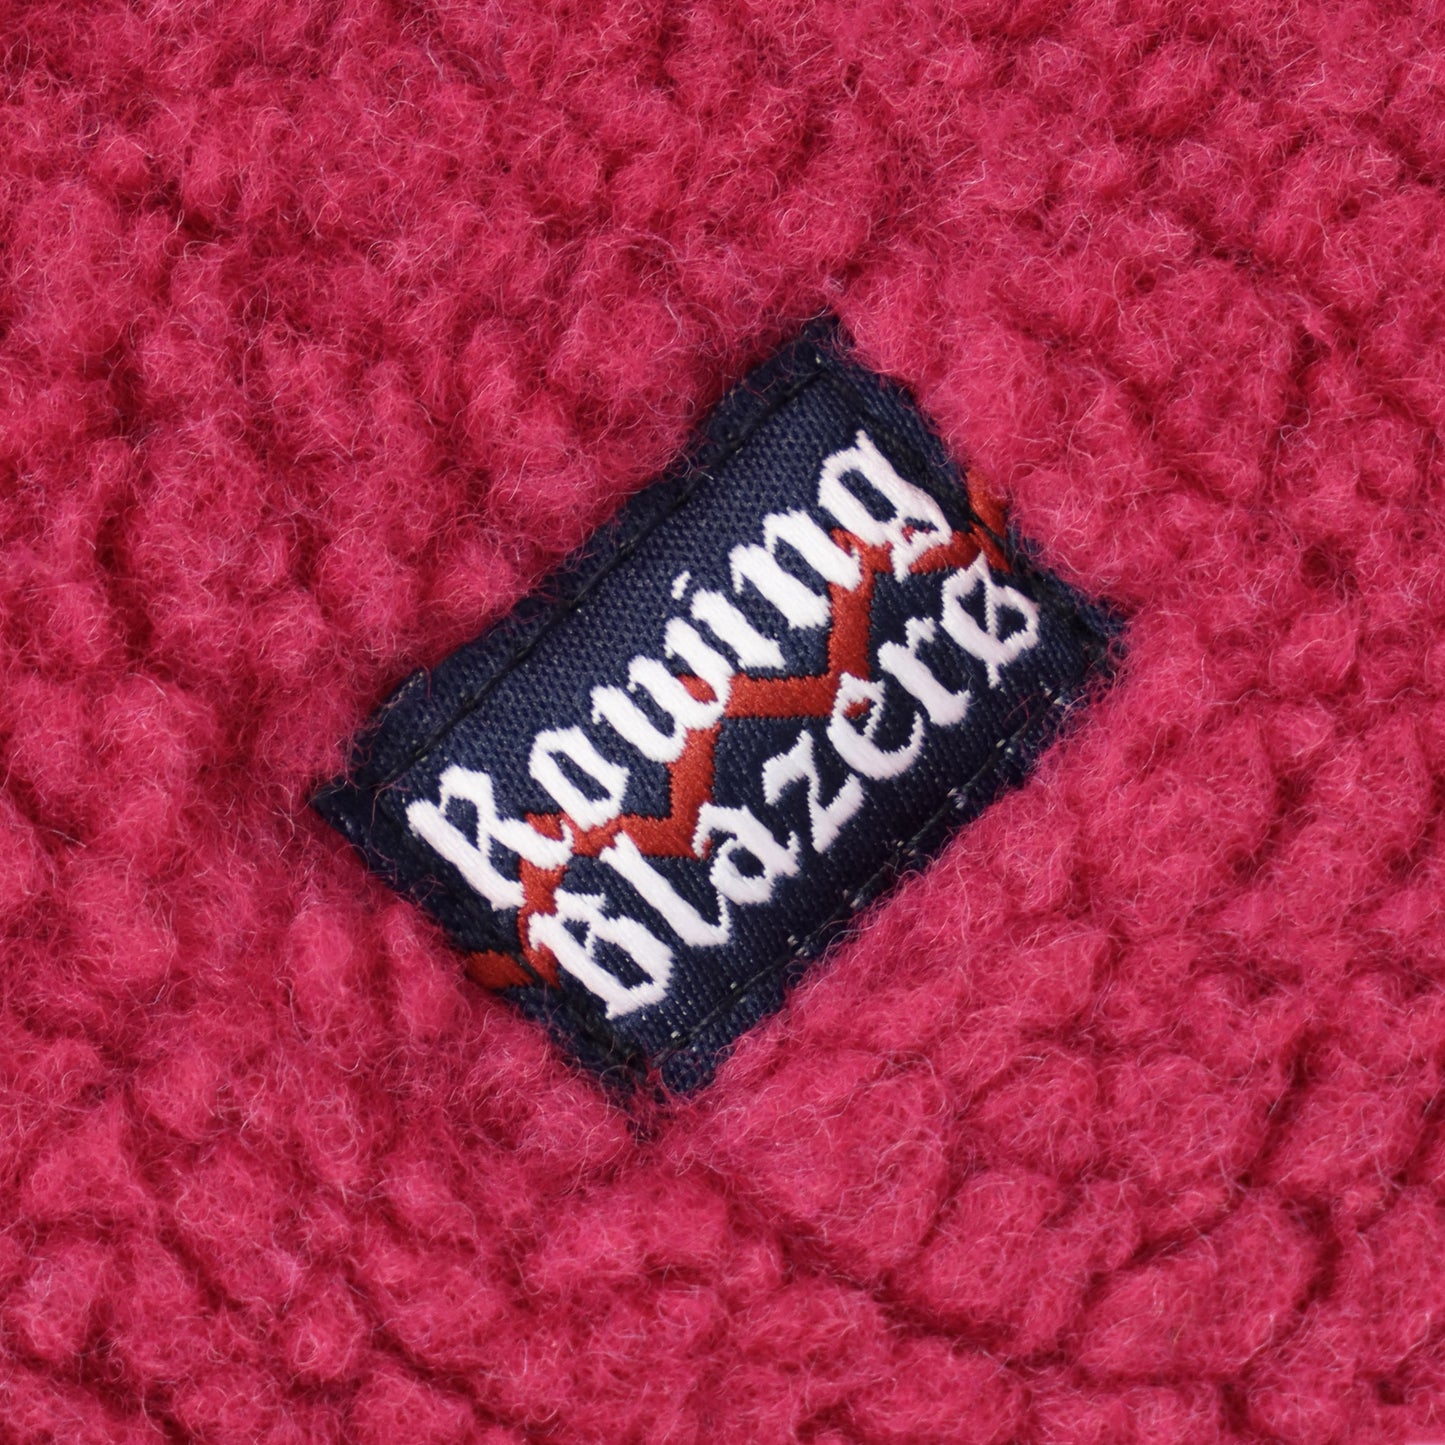 Small Rowing Blazers logo tag on left chest.